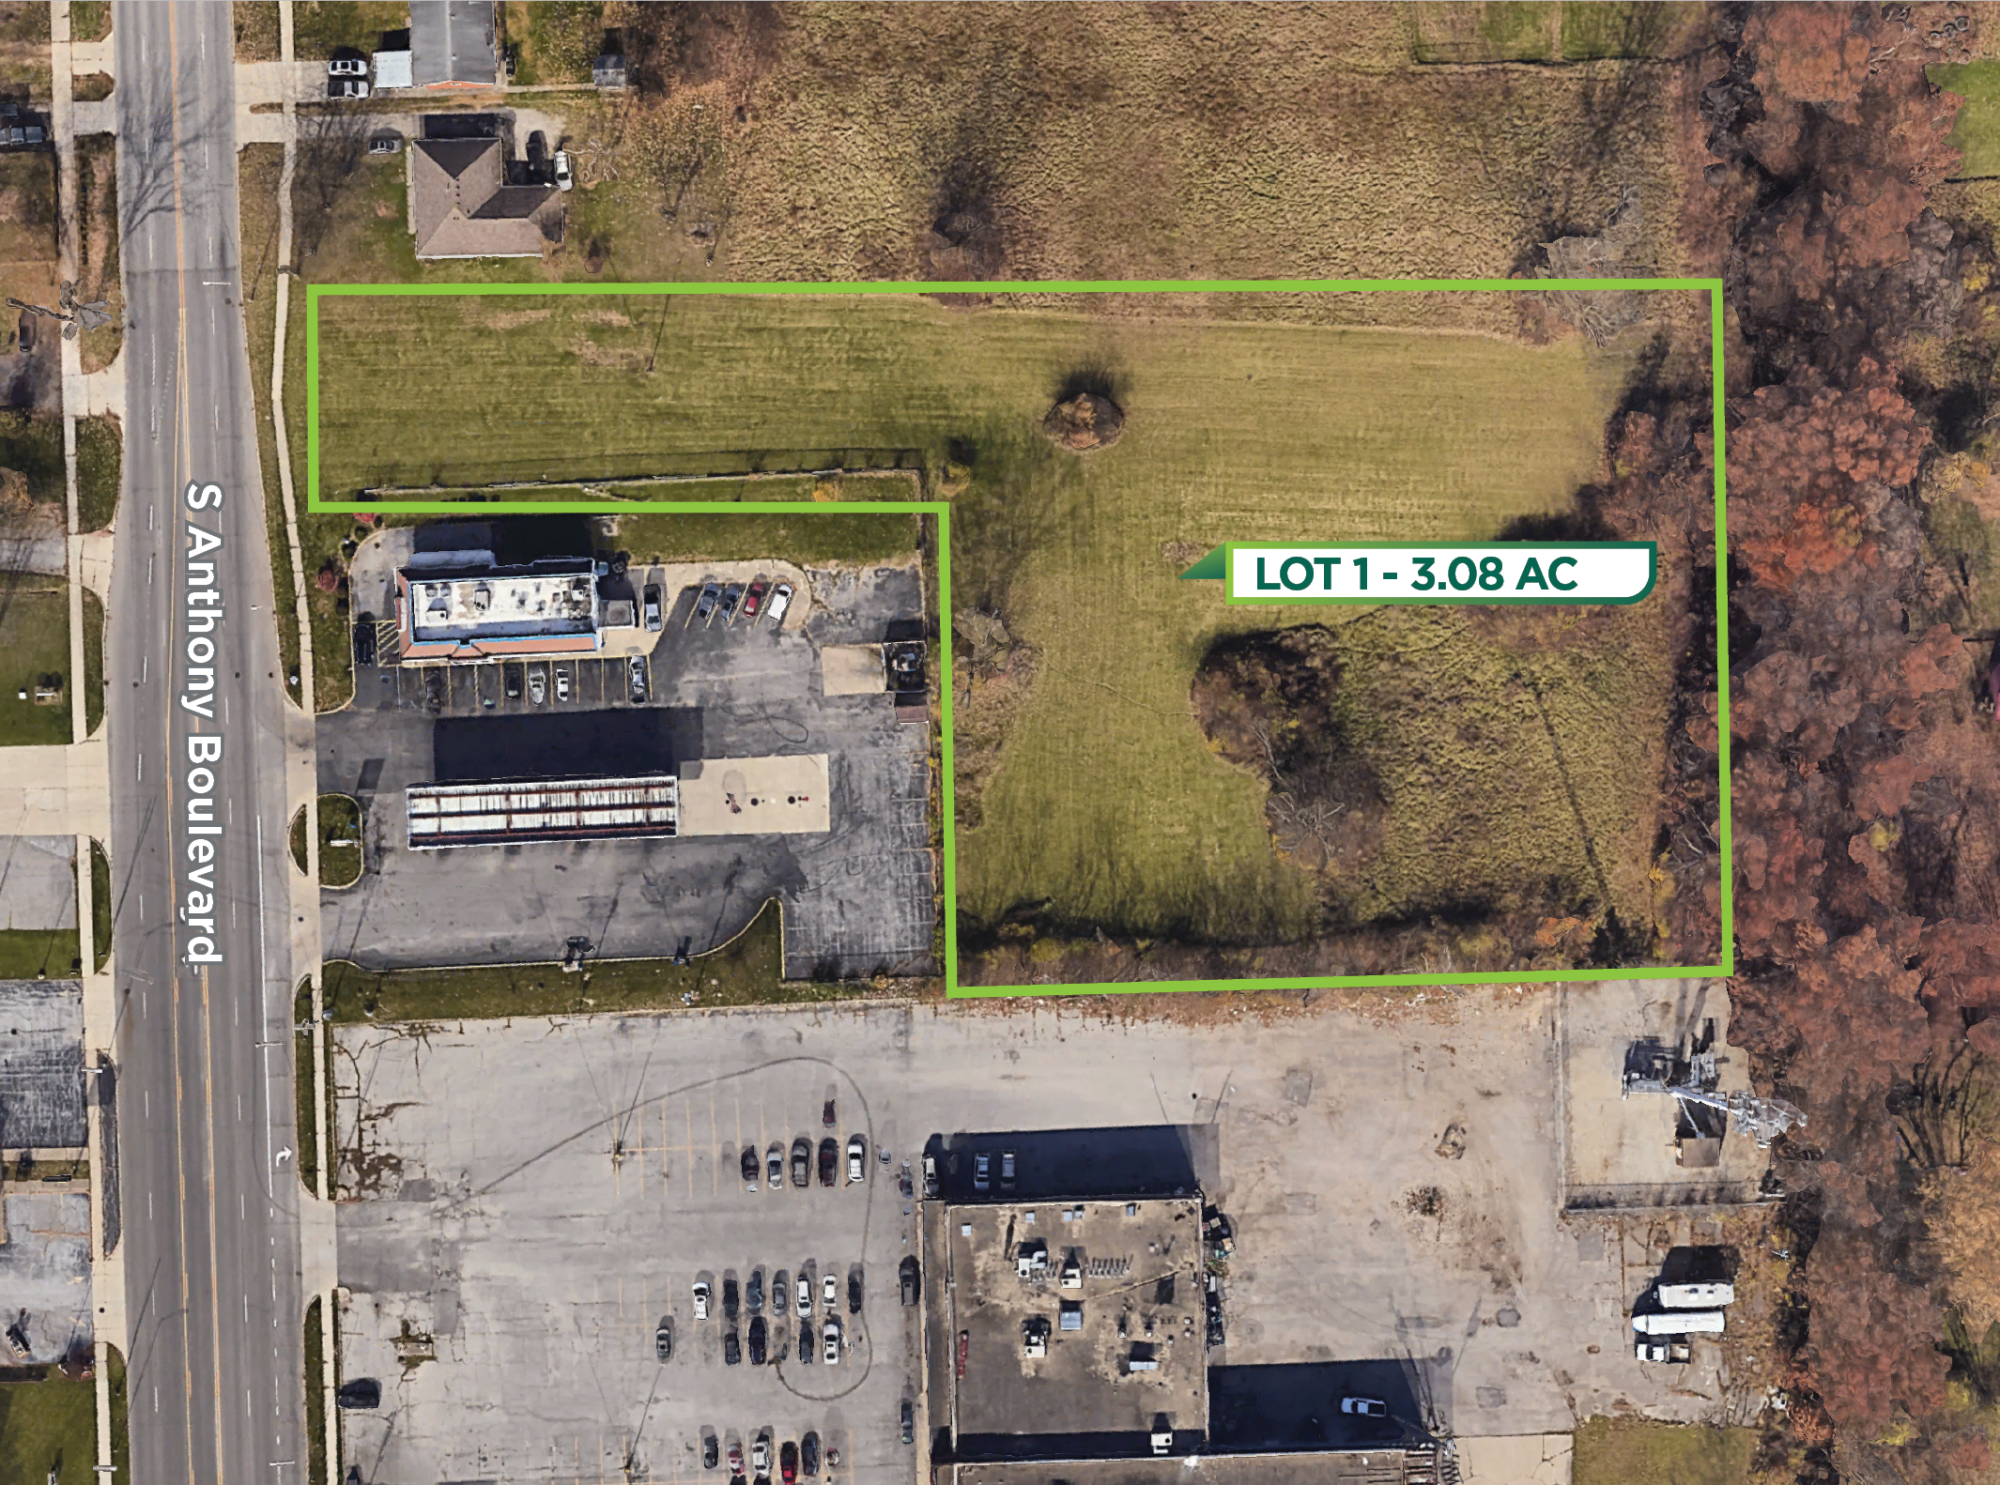 Sturges Property Group - Commercial Land For Sale South Fort Wayne Anthony Blvd